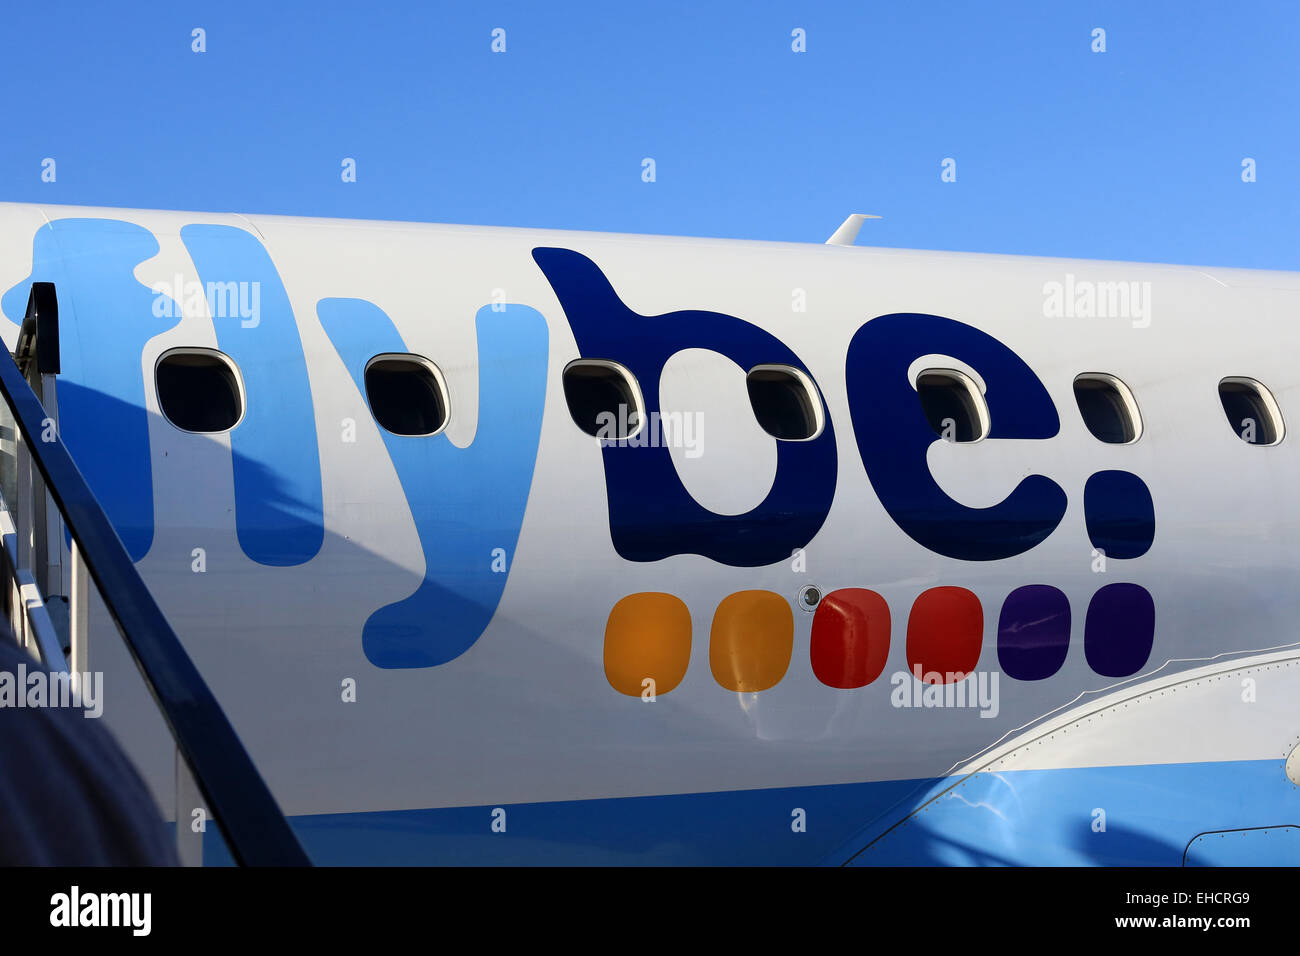 A flybe passenger jet aircraft with Flybe logo Stock Photo